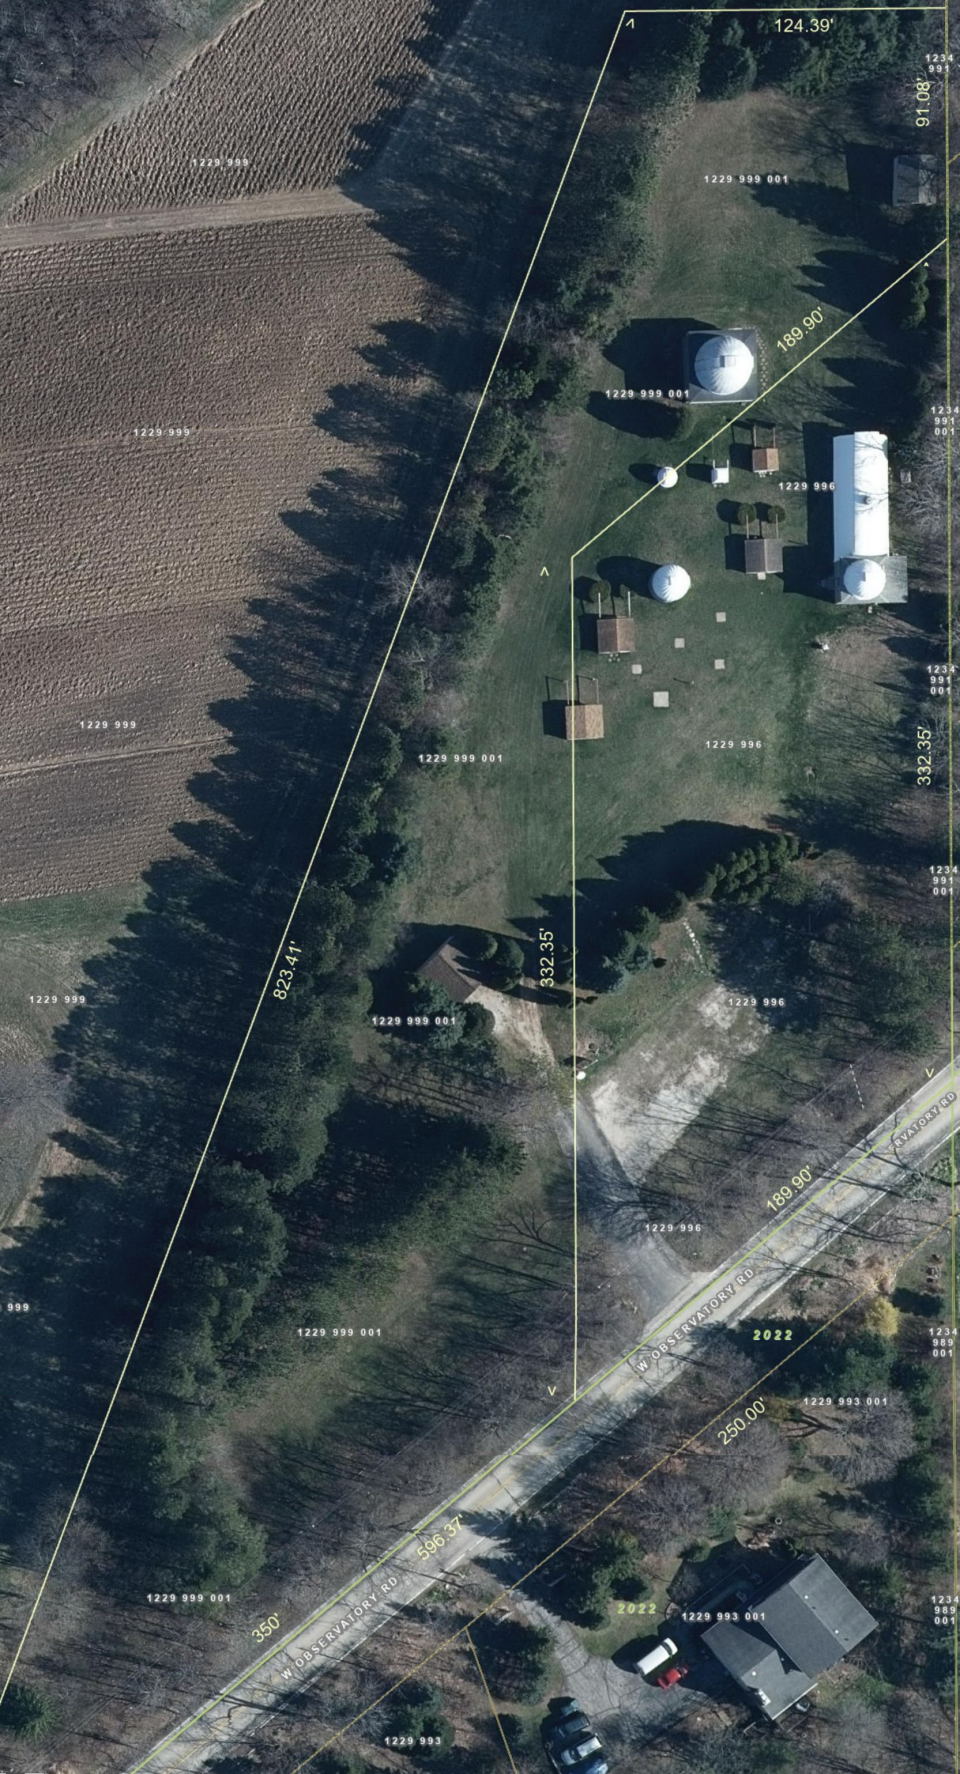 New and old observatory property lines. 2020 aerial photo.